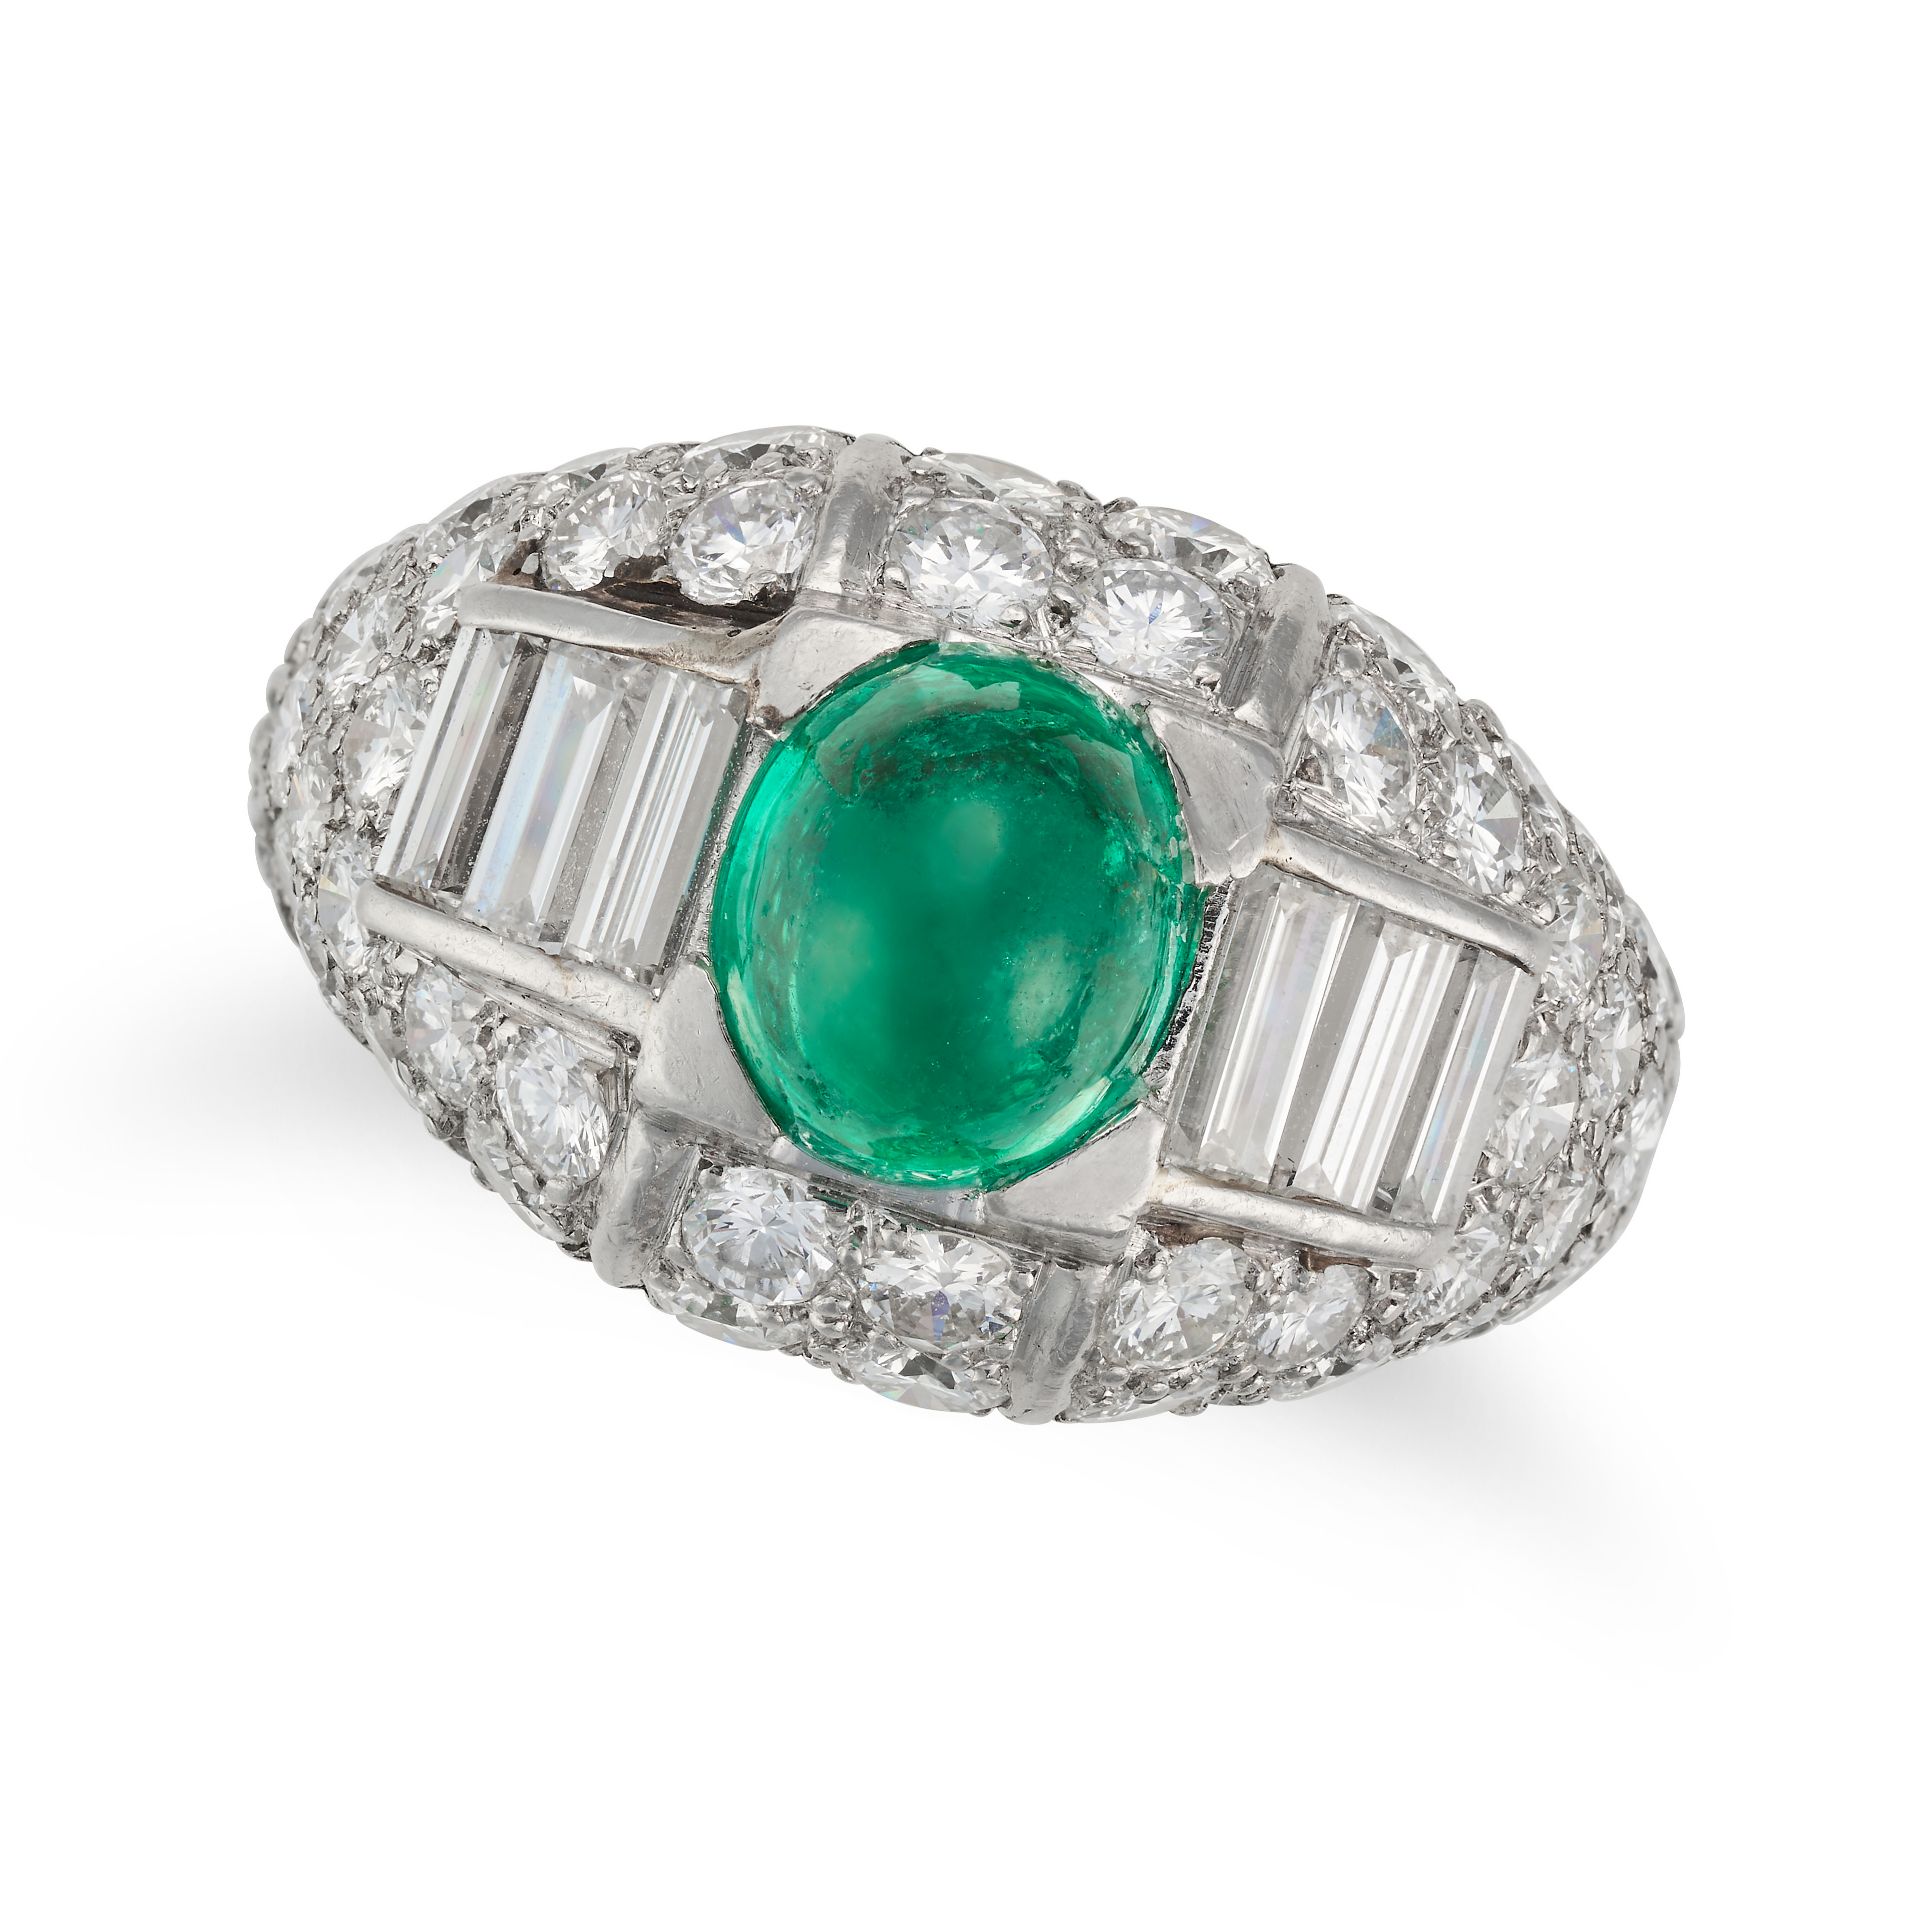 CARTIER, A FINE EMERALD AND DIAMOND RING in platinum, set with an oval cabochon emerald of approx...